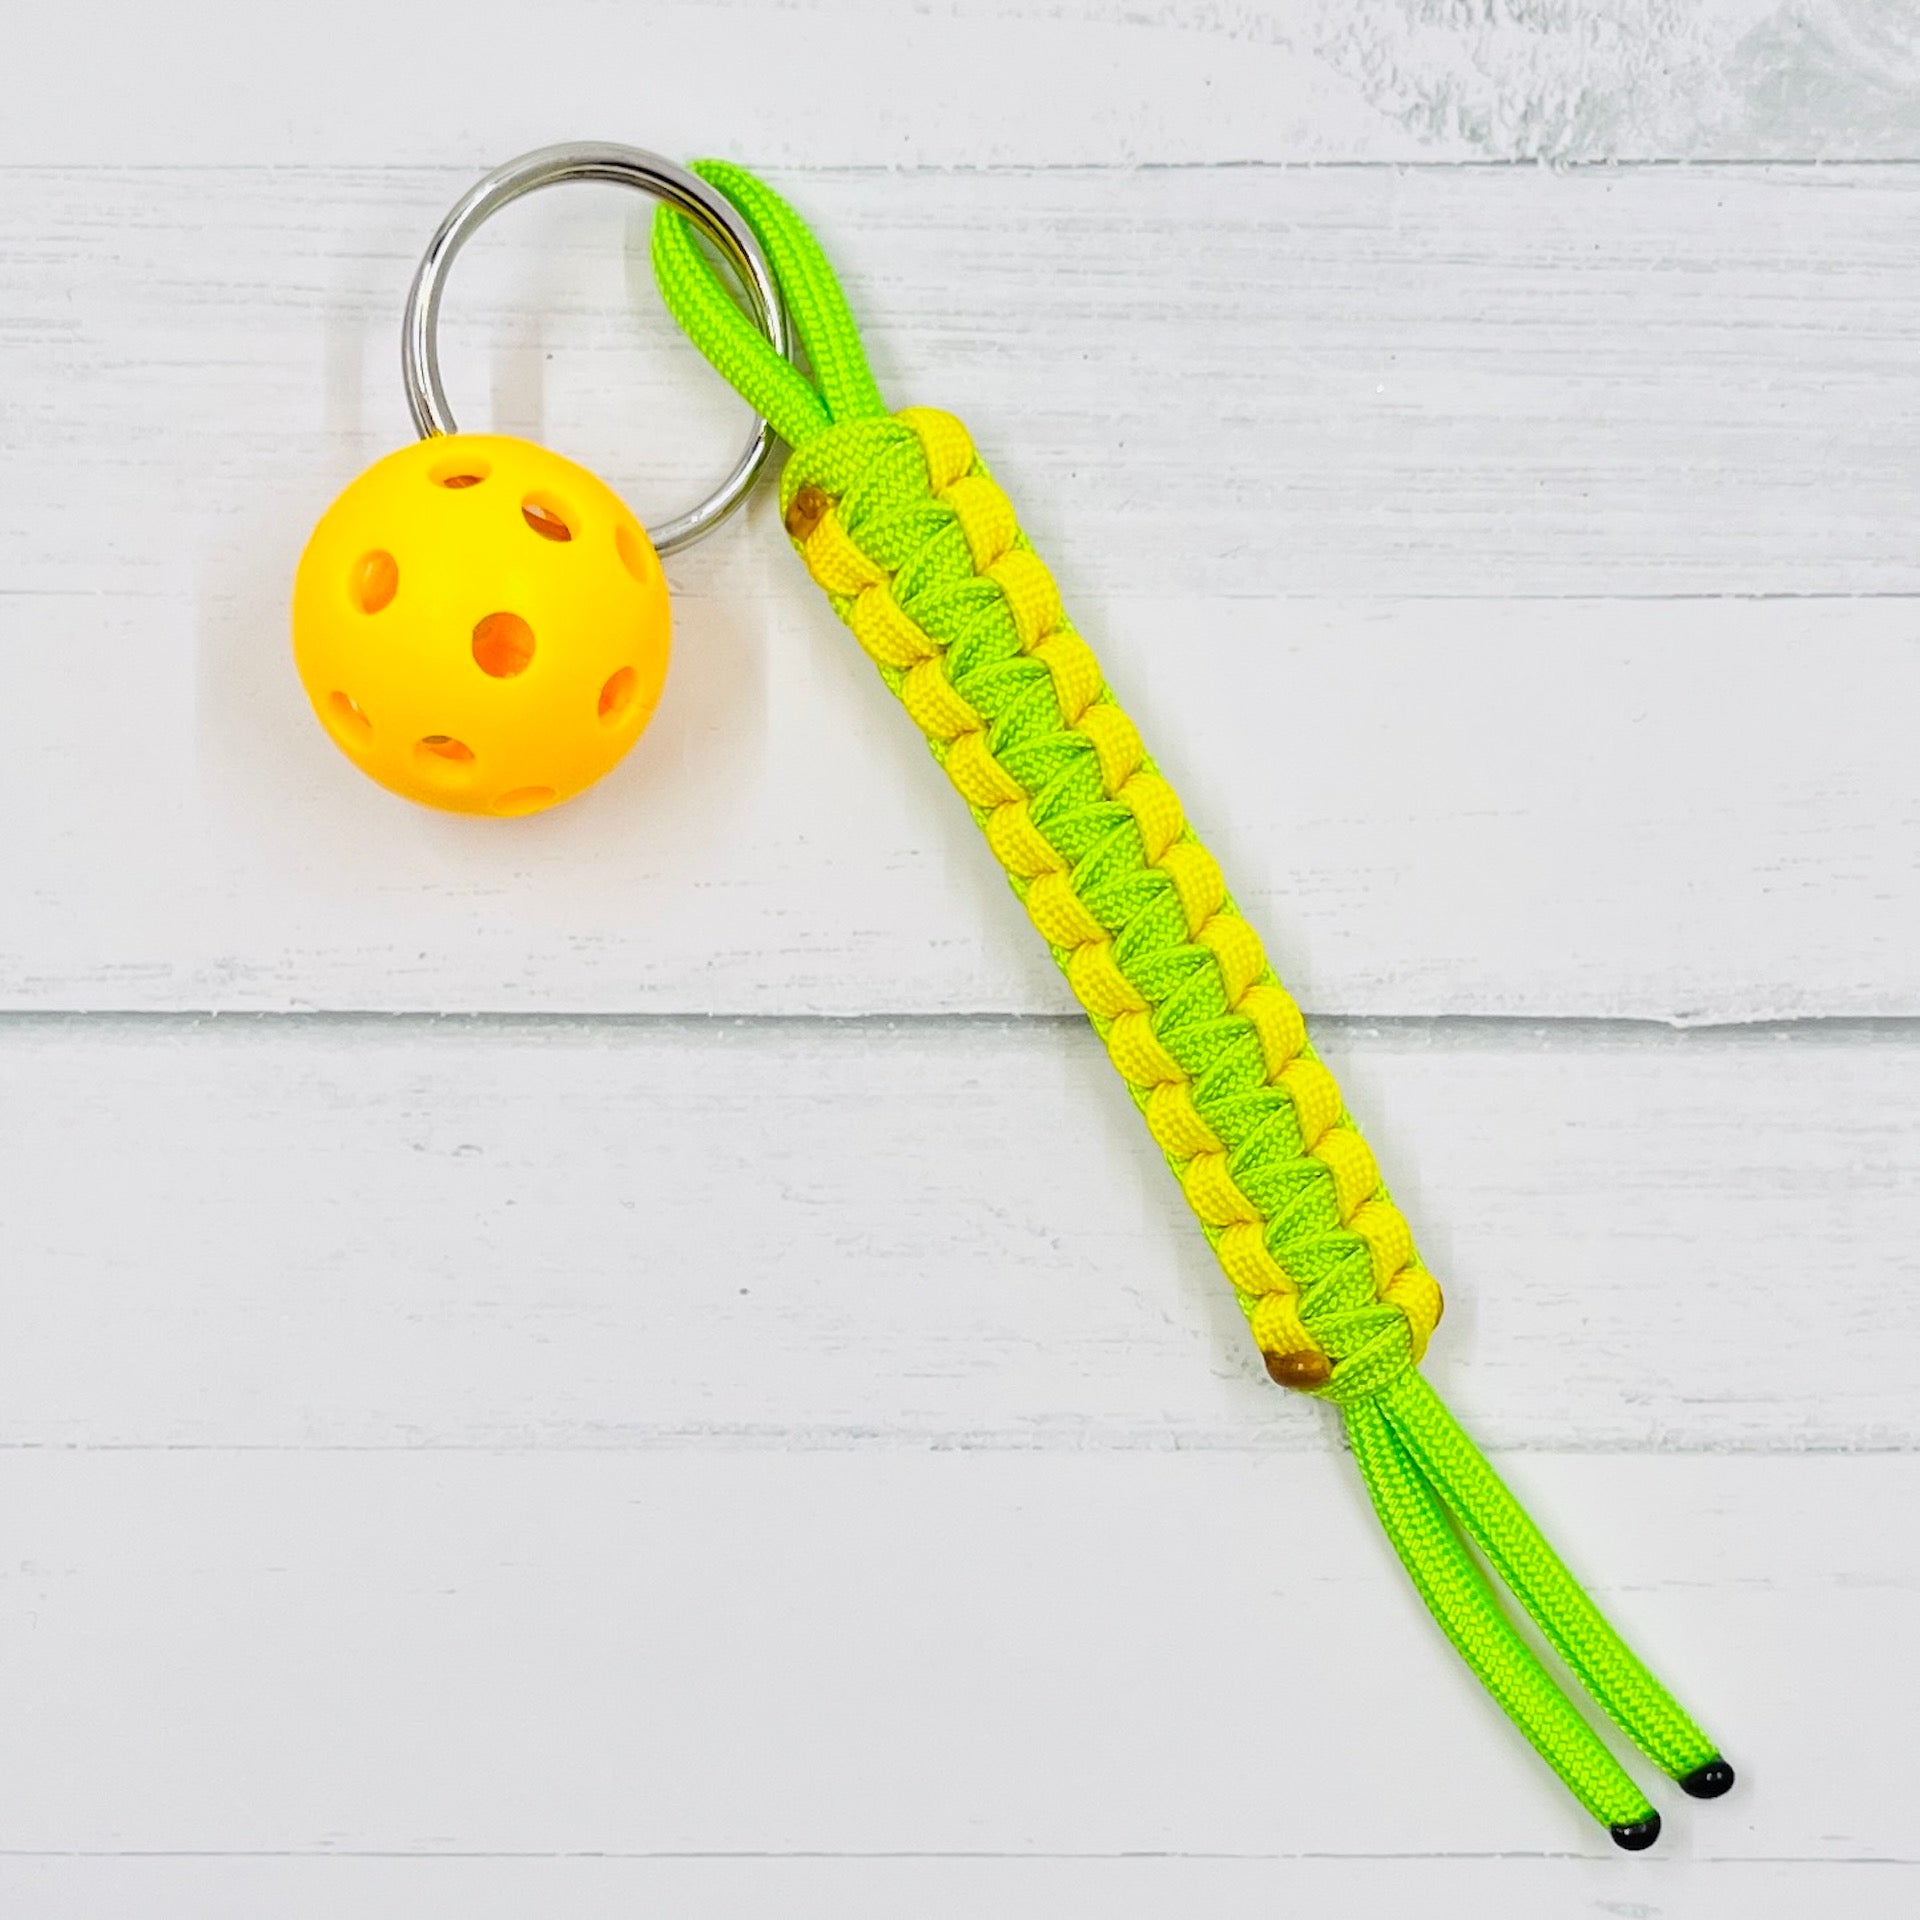 Micro Pickleball Keychain with Pull Tag Lanyard  This keychains are one-a-kind. They are super heavy duty and guaranteed to become your favorite keychain ever. There are multiple colors to choose from (and custom requests are available when possible). You also get to choose the color of ball you would like.  These keychains make it is so much easier to find your keys, especially in a purse. They are easy to carry also.